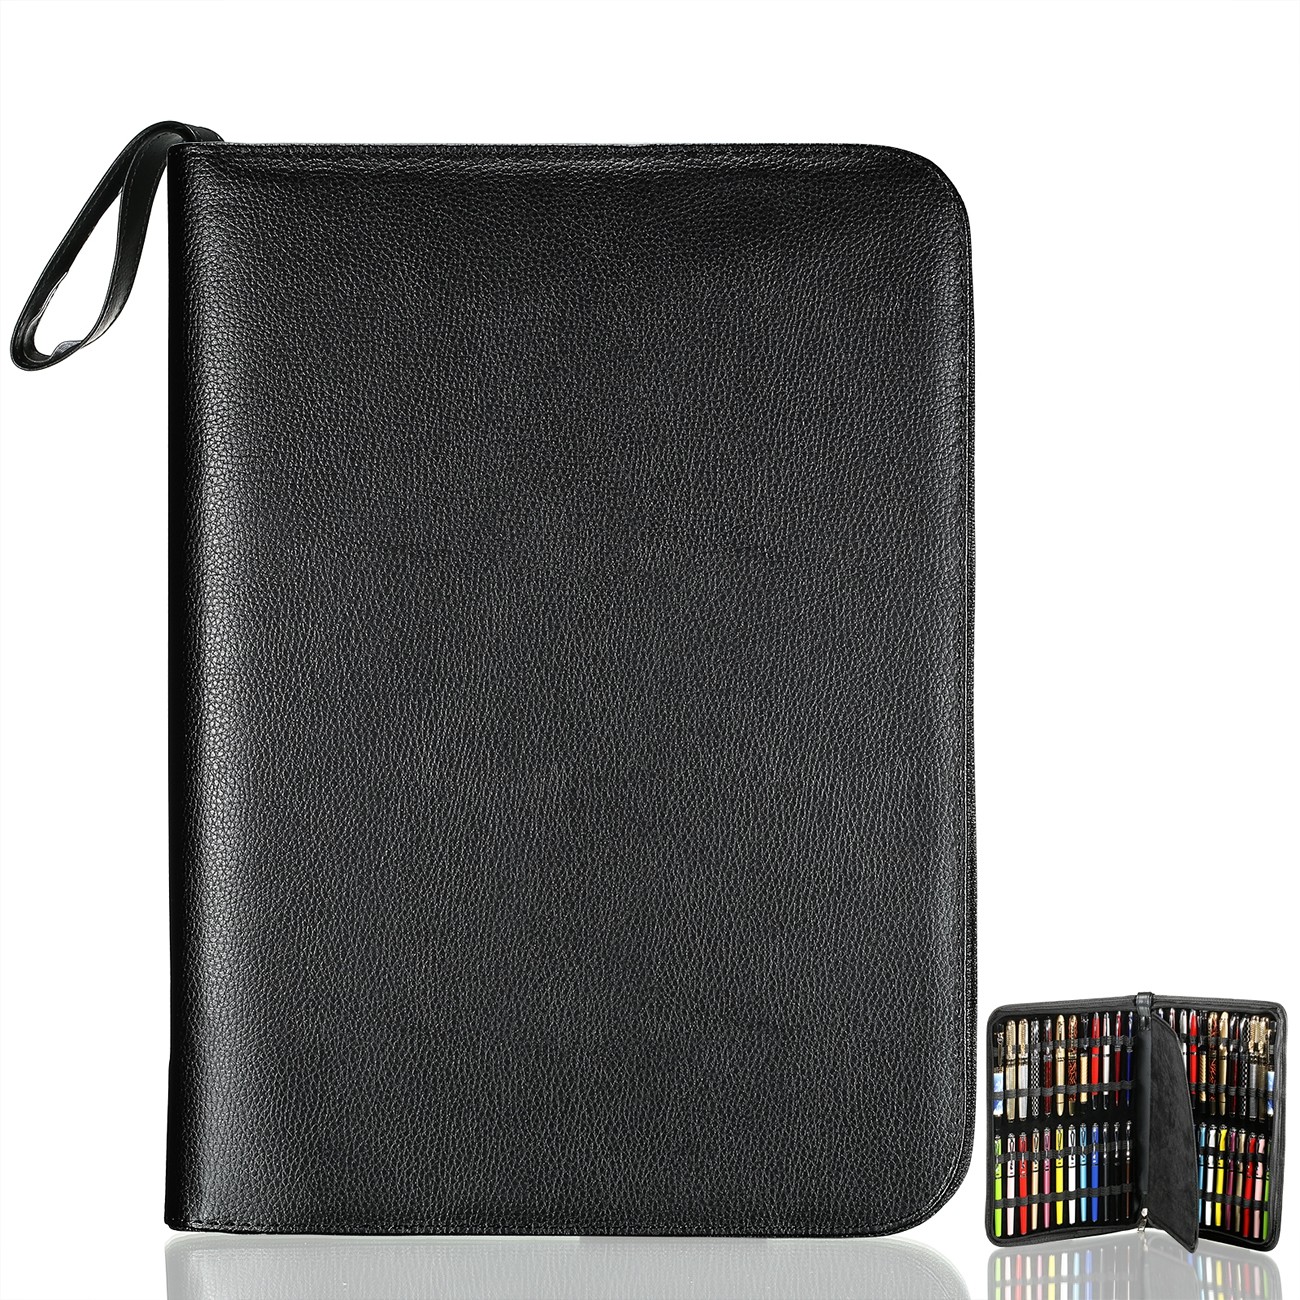 Wholesale Large Capacity PU Leather Fountain Pen Set Case With 48 Slots  Black Pen Pouch Bag HKD230831 From Flying_king18, $9.46